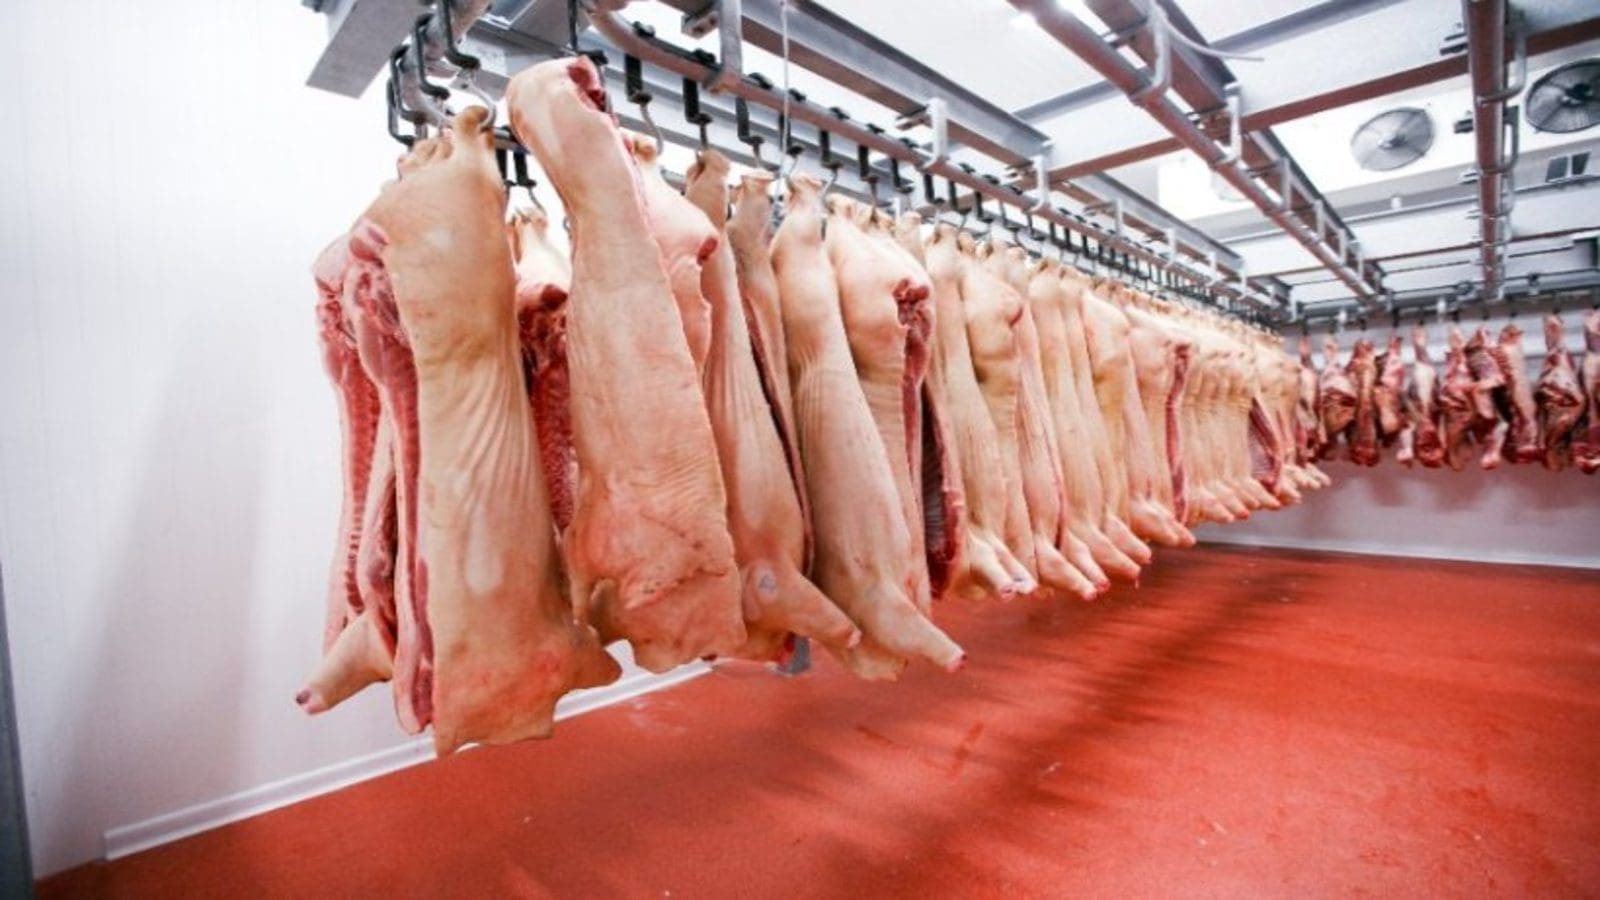 British Meat Processors Association views new UK regulations as an impediment to meat export to EU